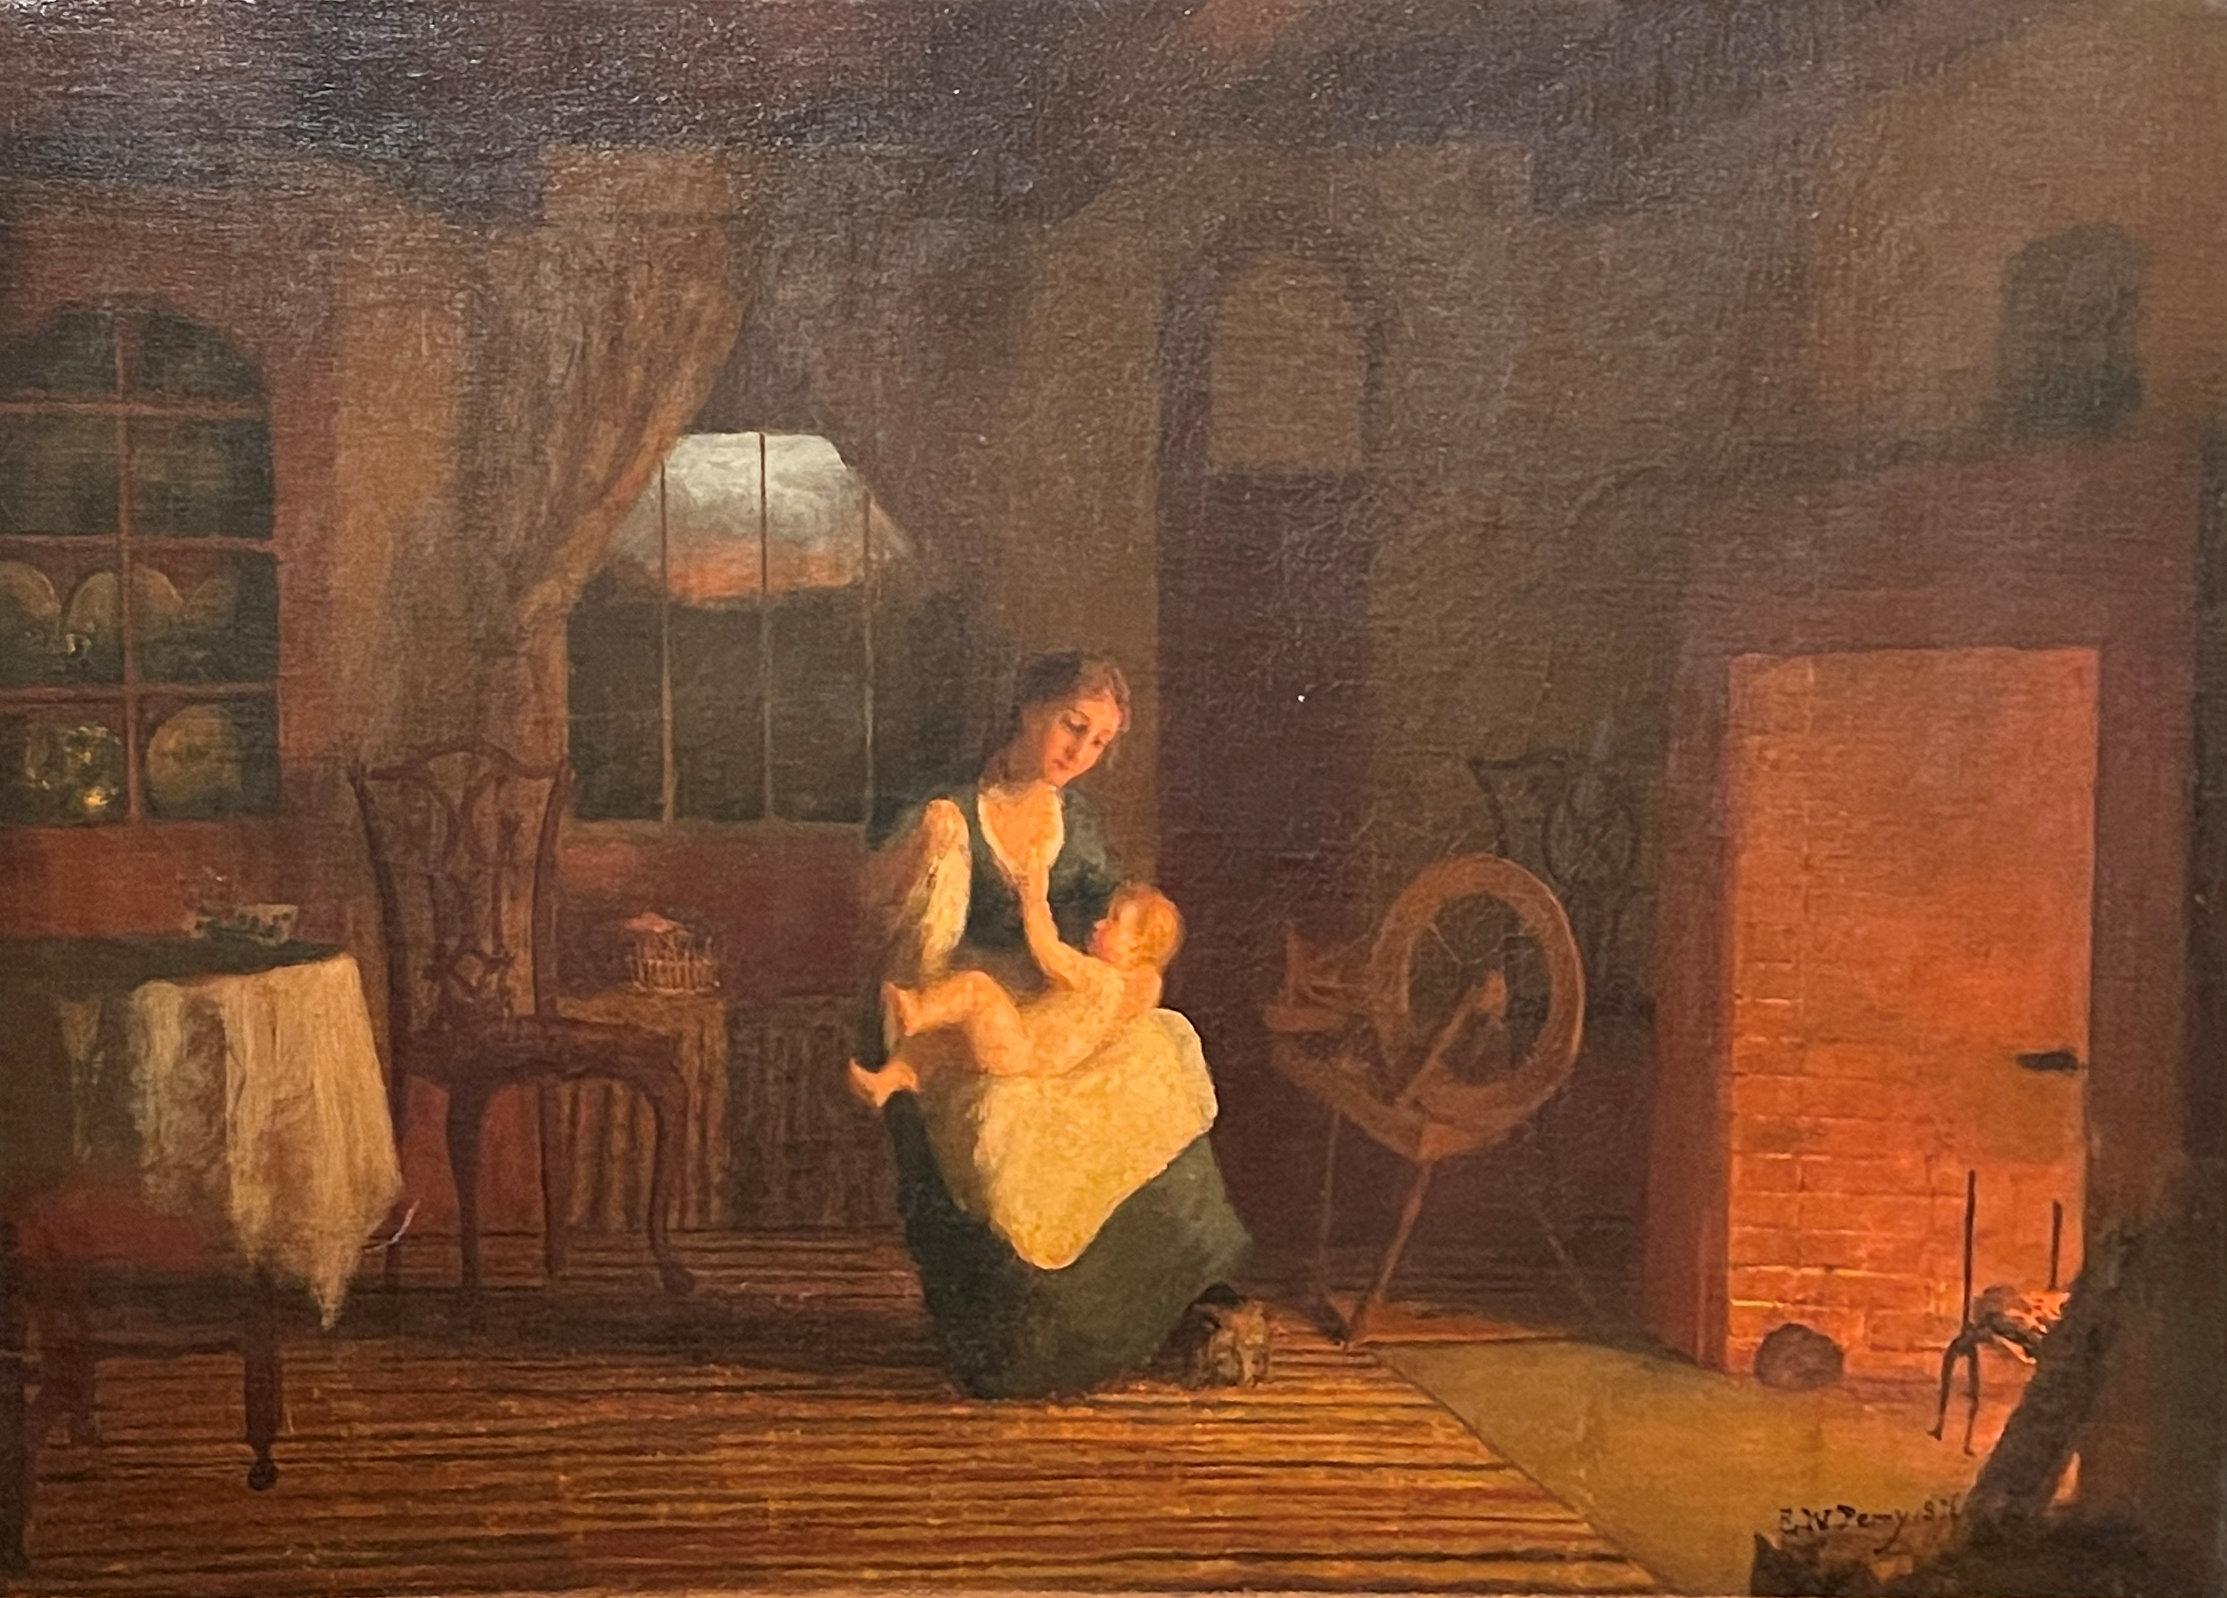 Enoch Wood Perry Jr. Interior Painting - "A Quiet Afternoon, " Enoch Wood Perry, Genre Scene Mother and Child at Fireplace